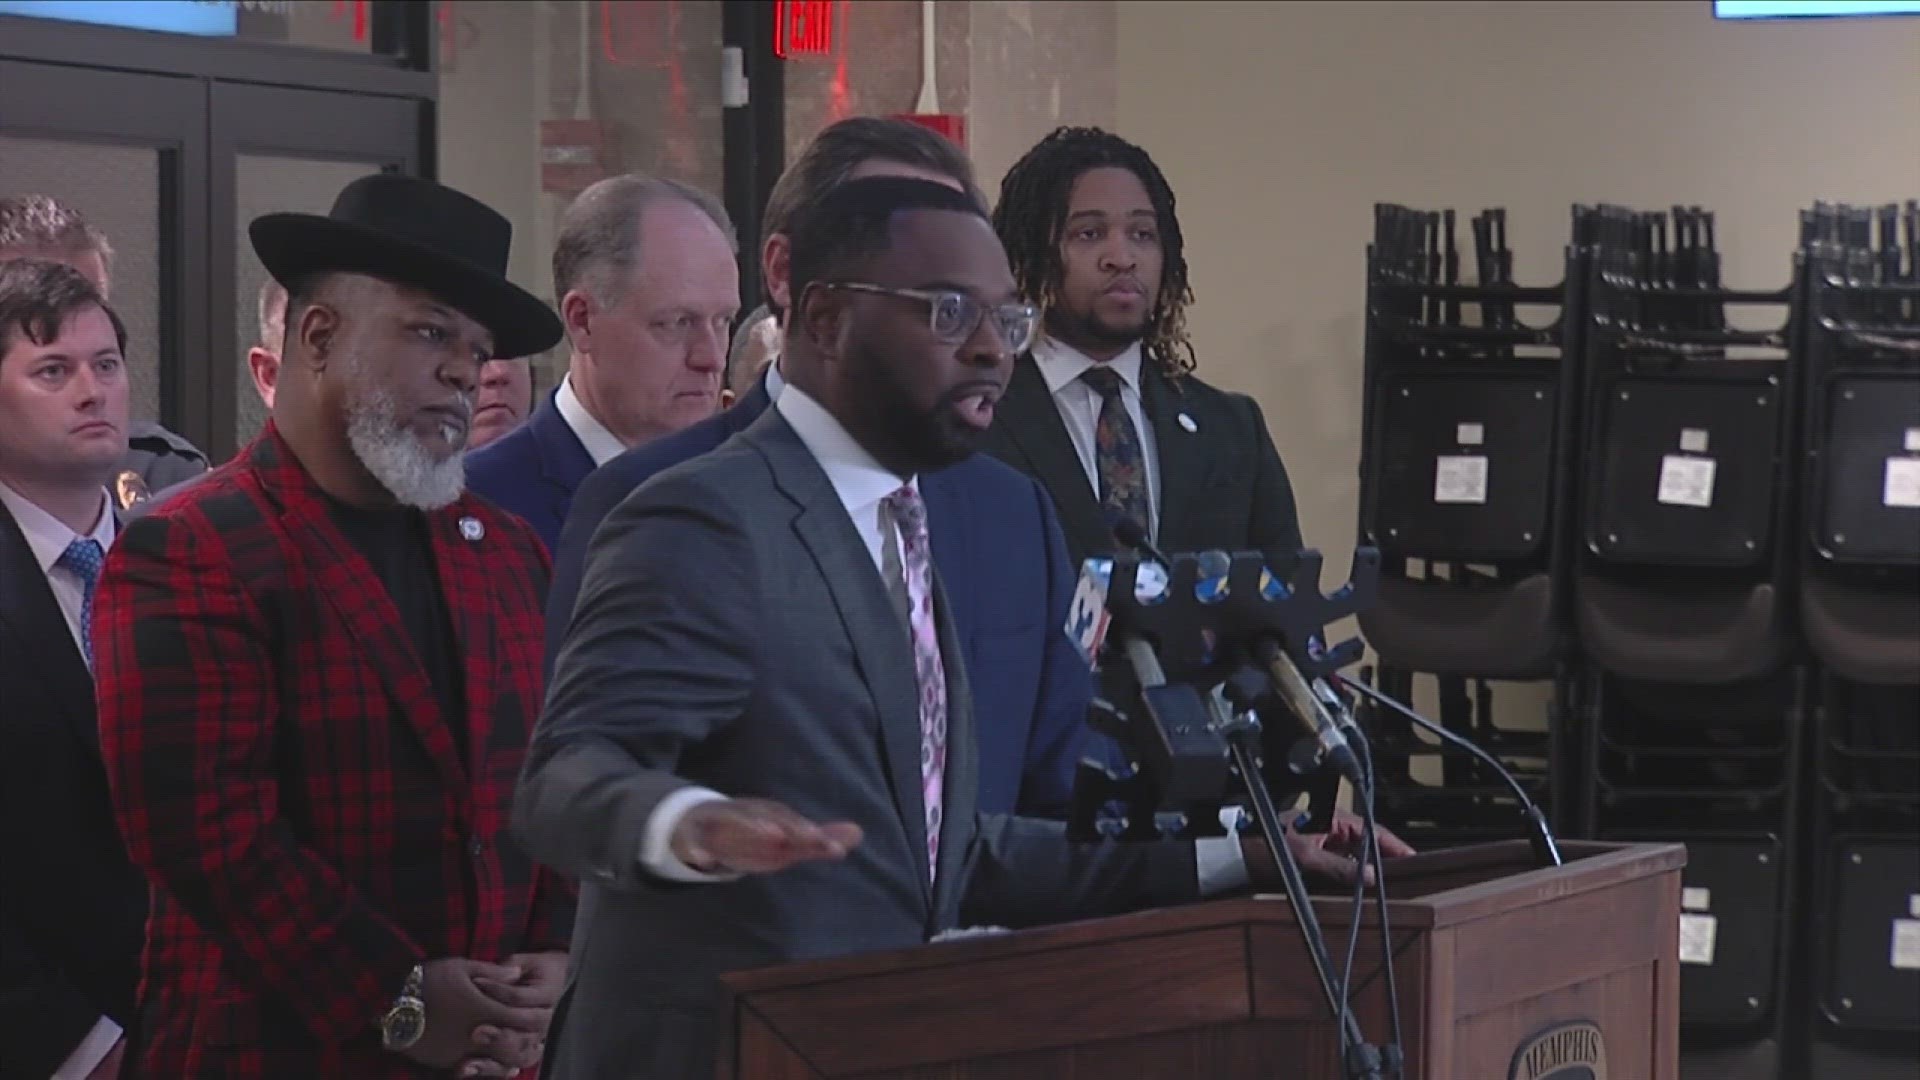 House Speaker Cameron Sexton made the announcement at city hall in Memphis alongside the city mayor, police chief, local district attorney and state lawmakers.